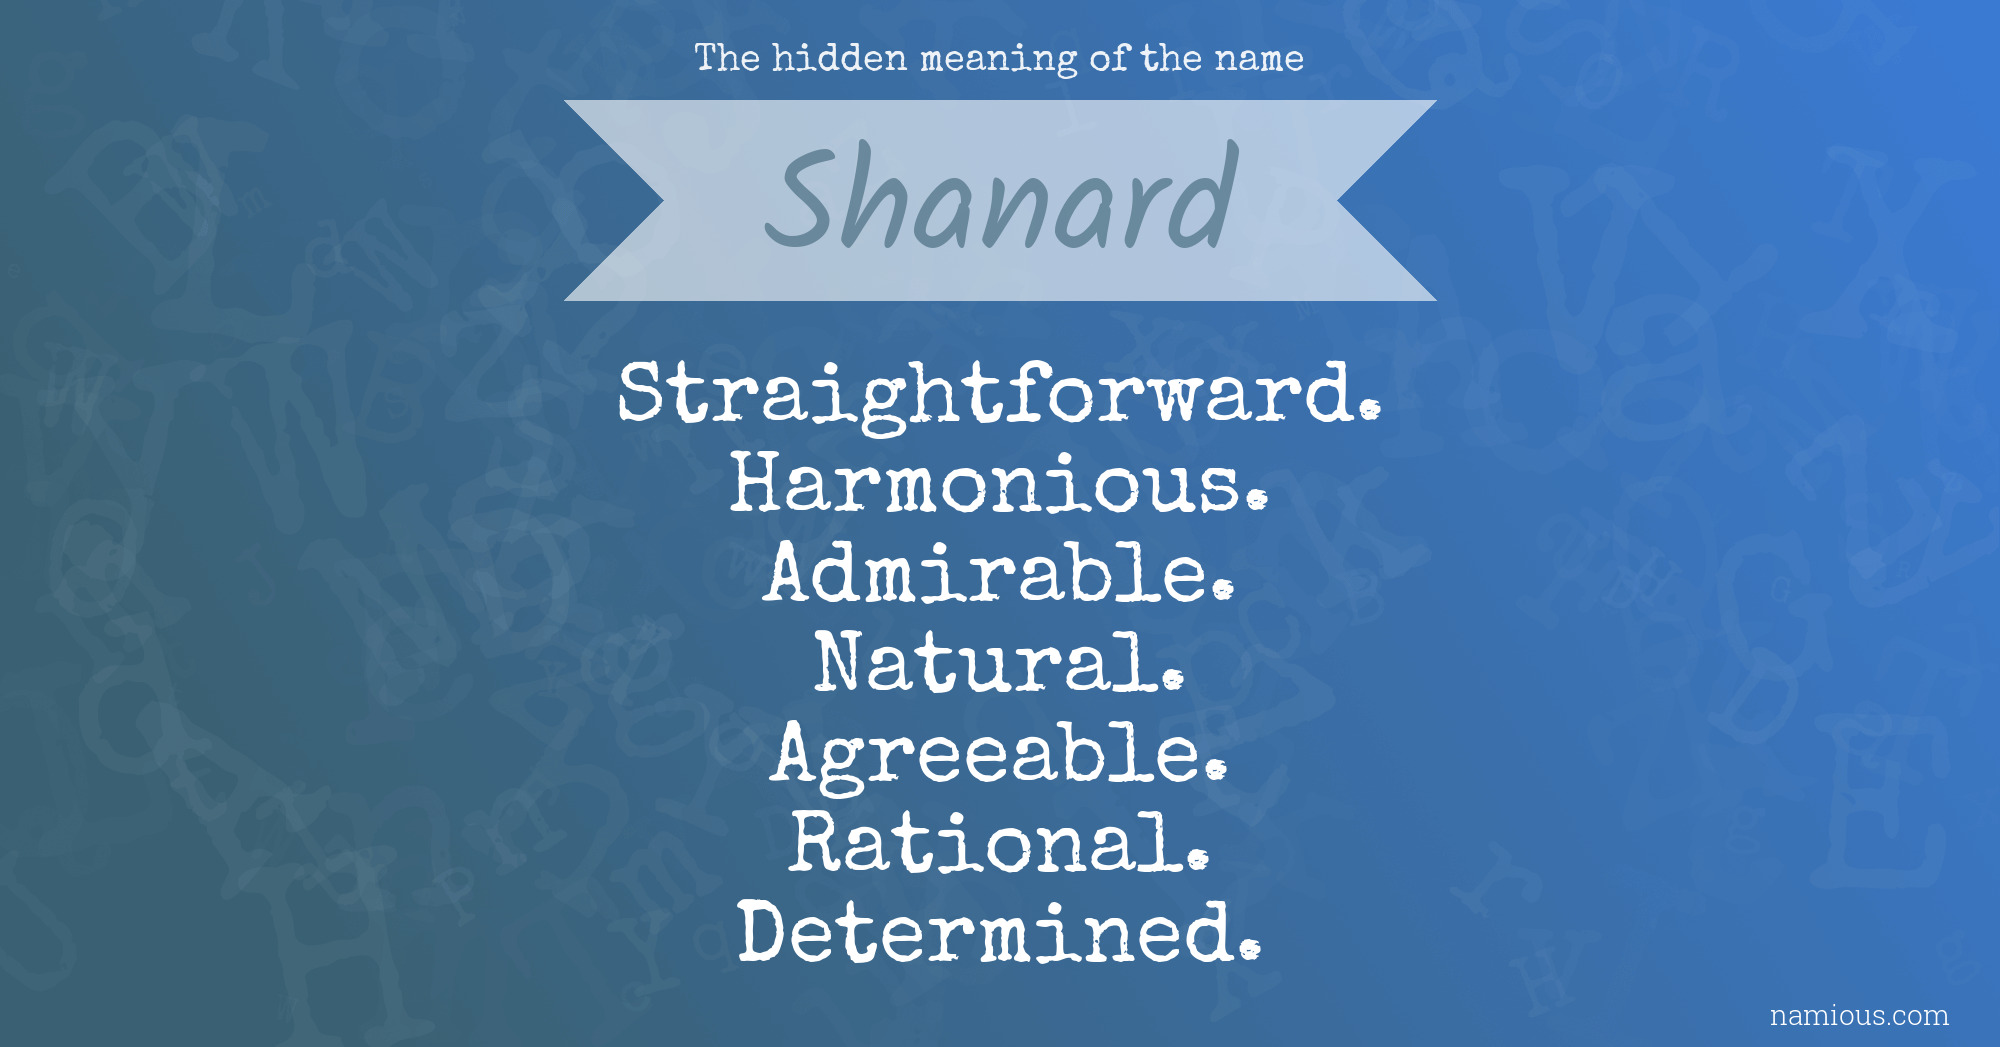 The hidden meaning of the name Shanard